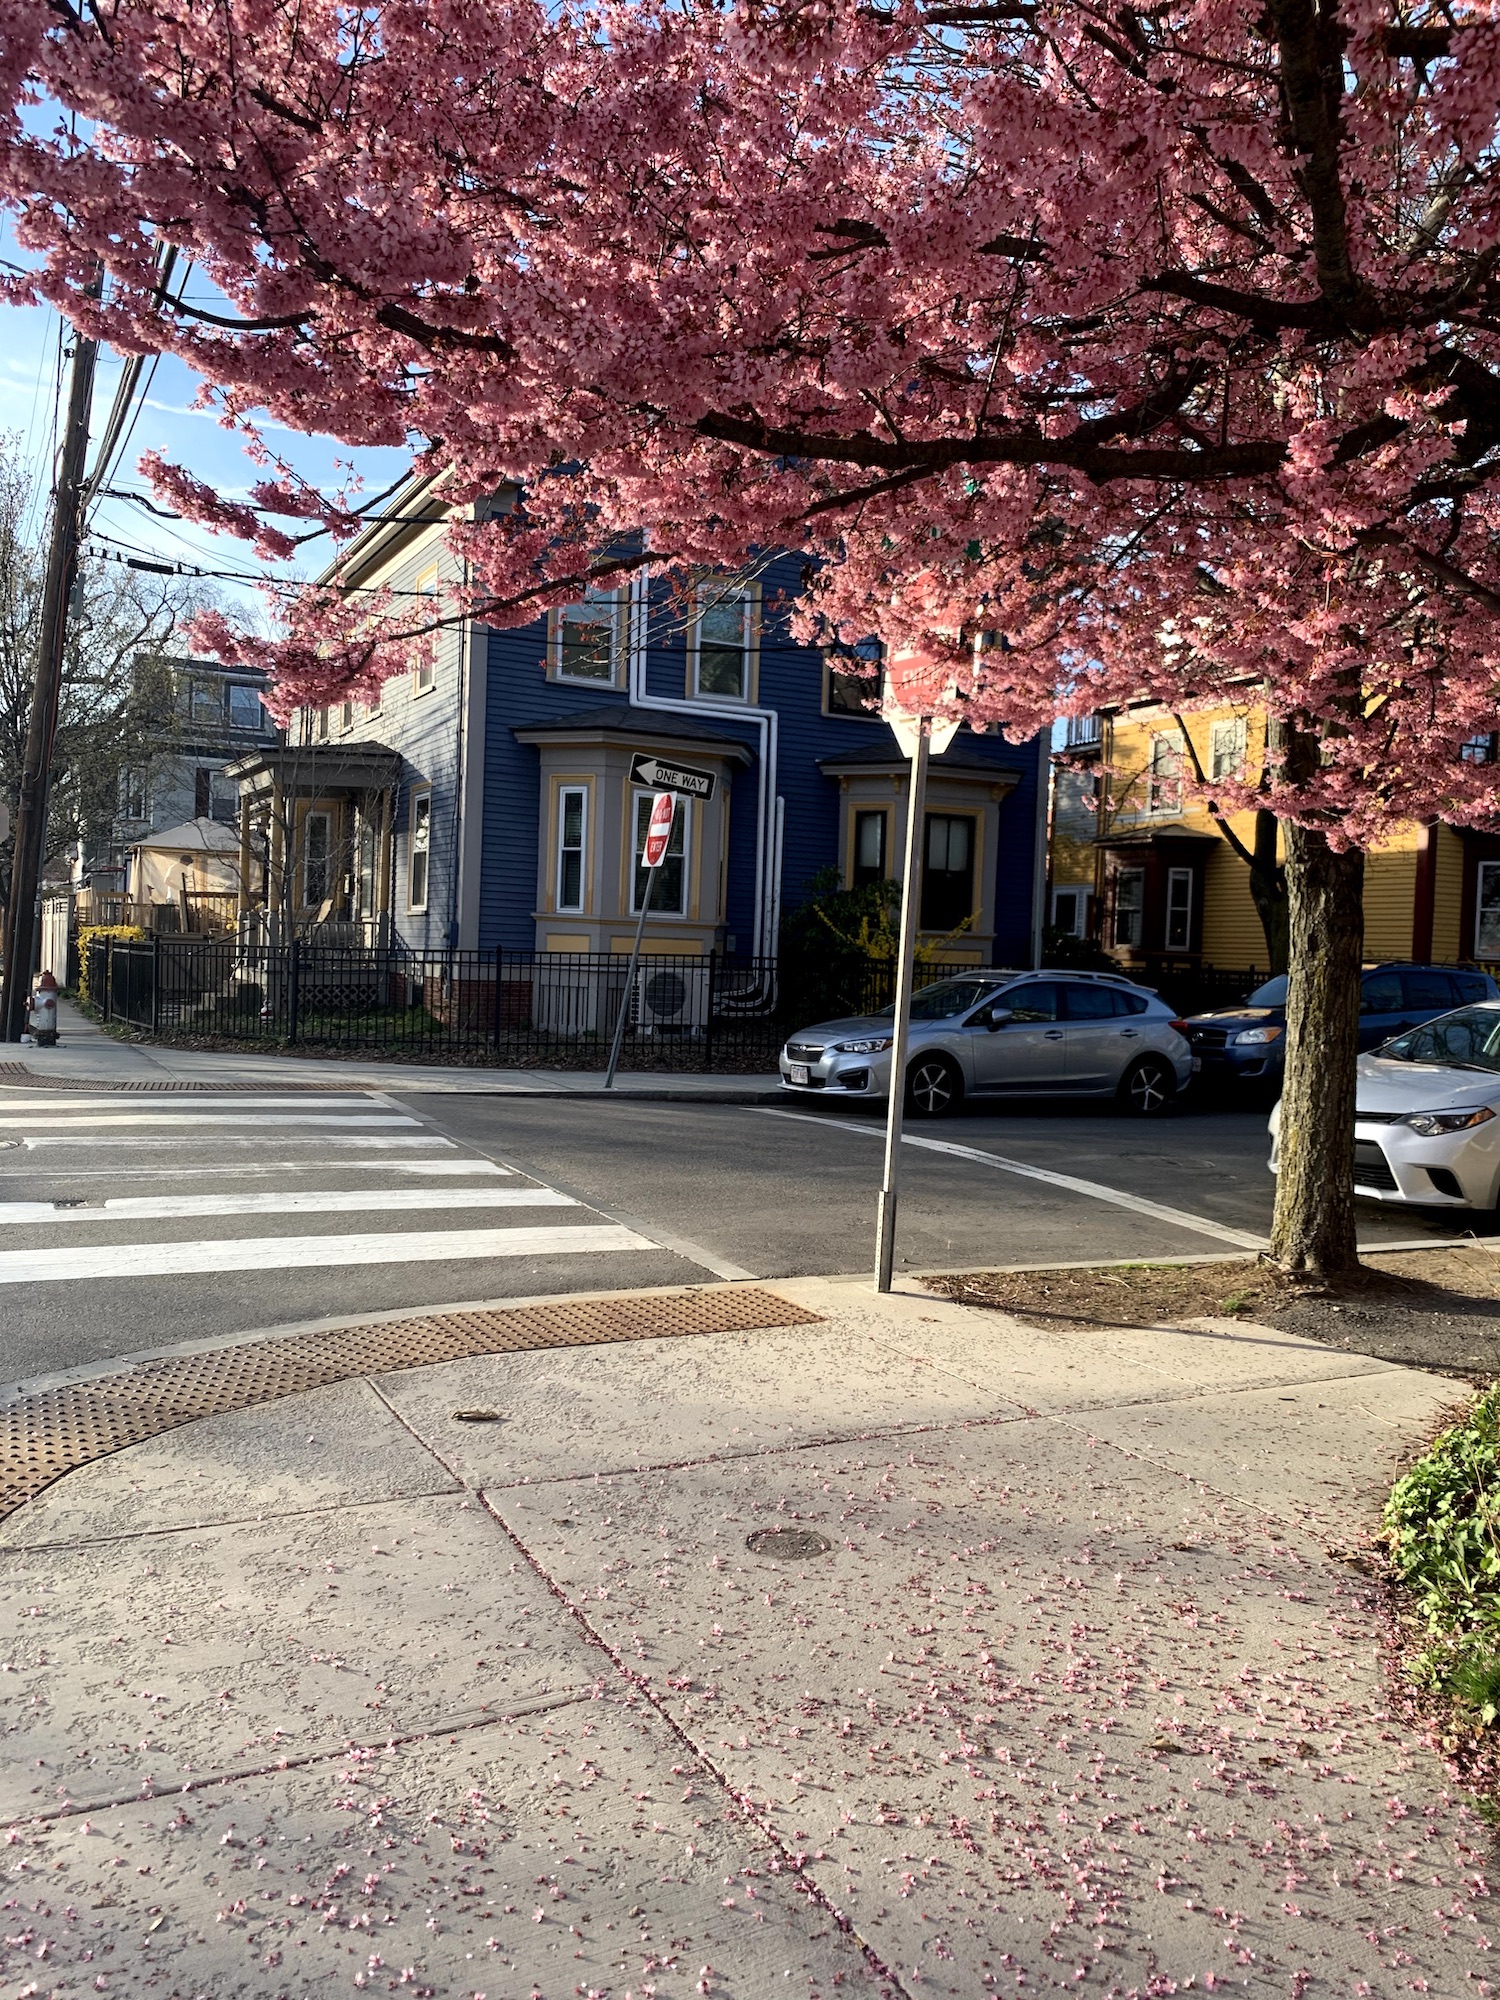 The pink cherry blossom tree dropping blooms onto a cozy Cambridge street corner.